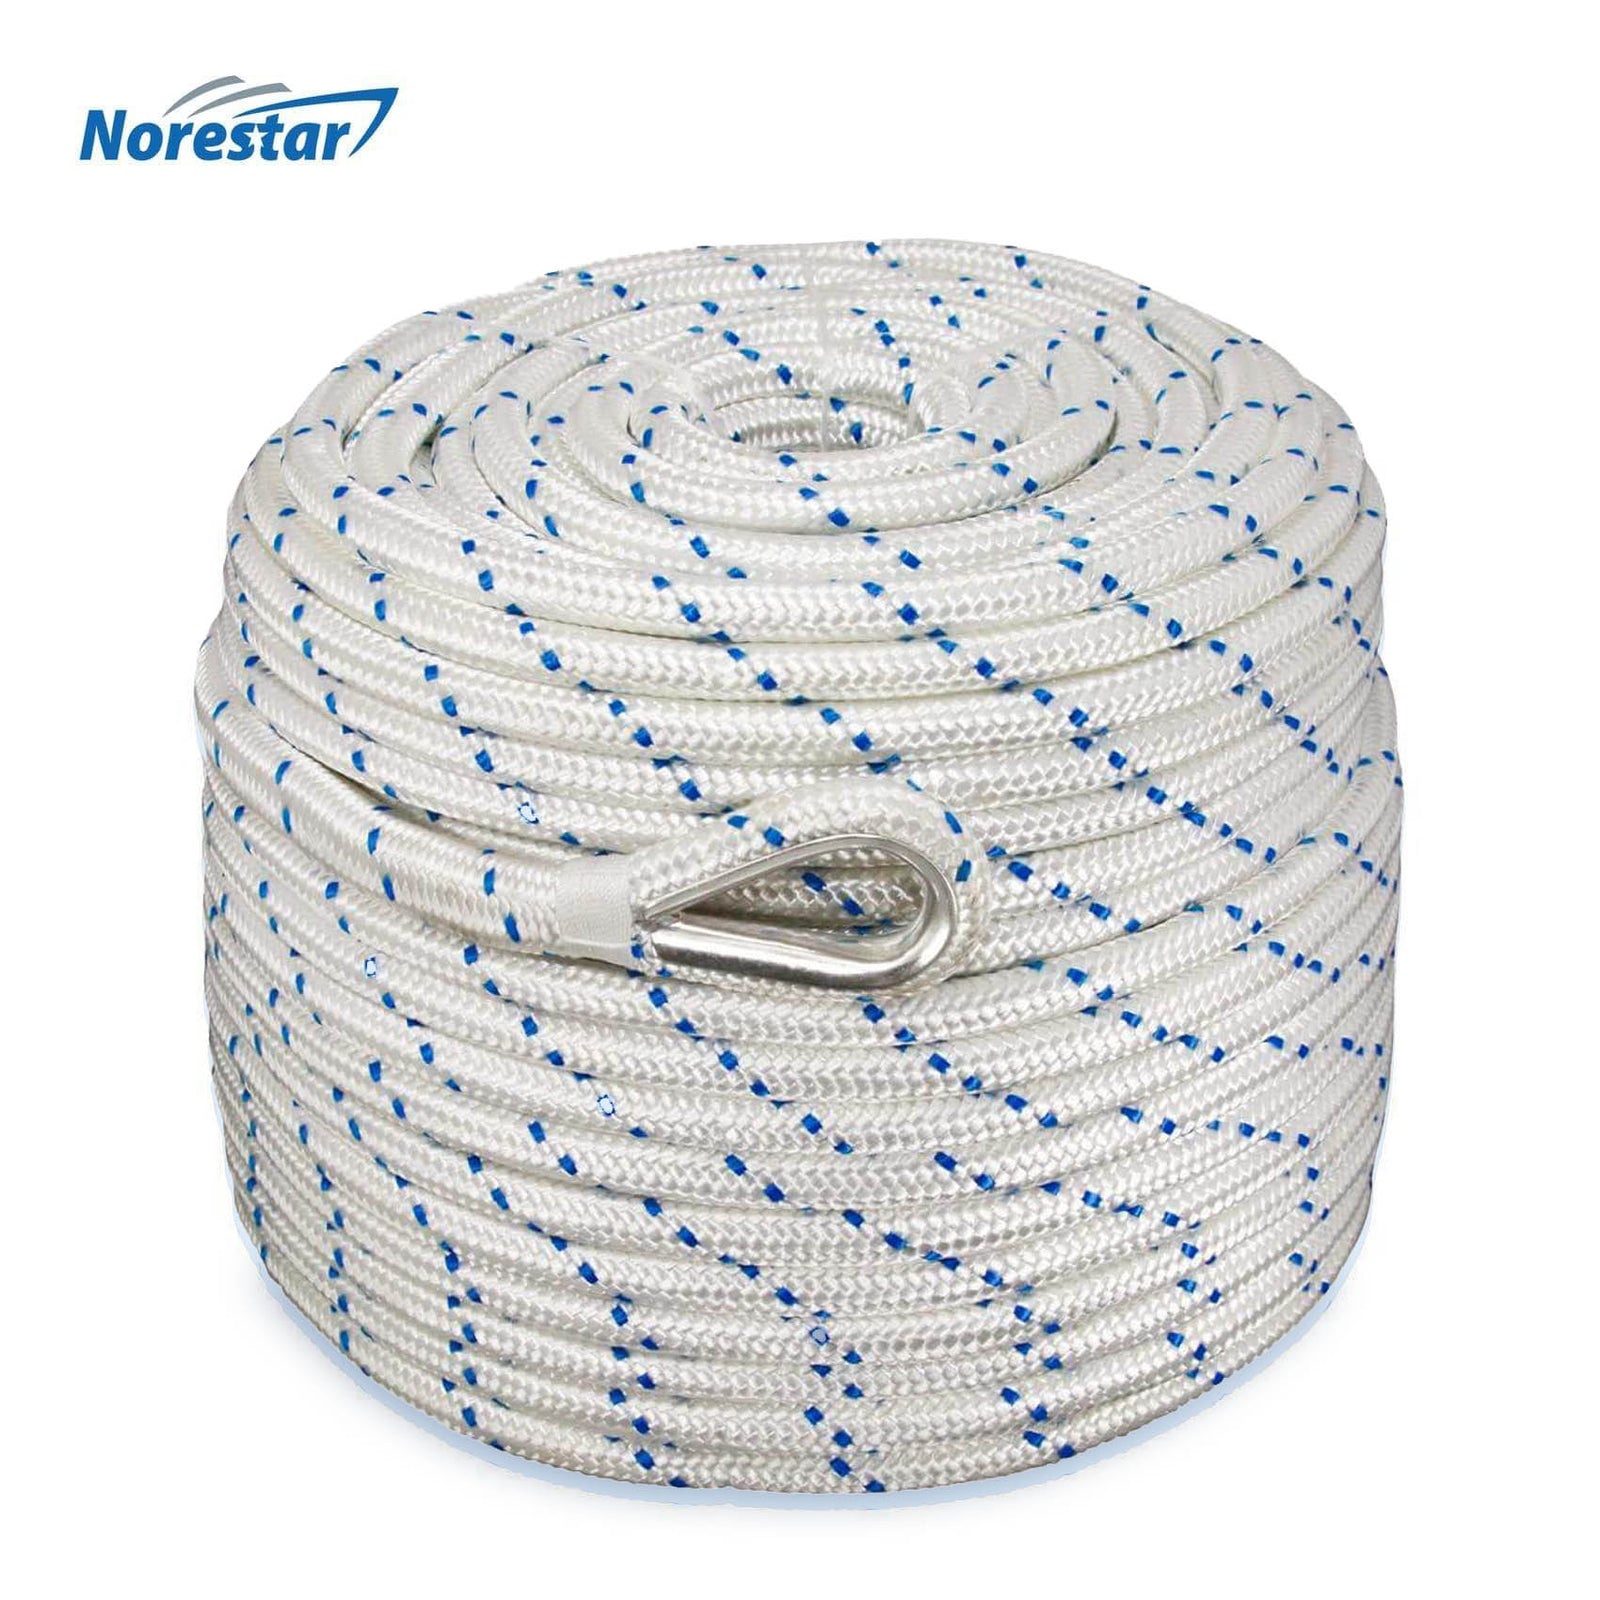 Norestar Double-Braided Nylon Anchor Rope - 1/2"